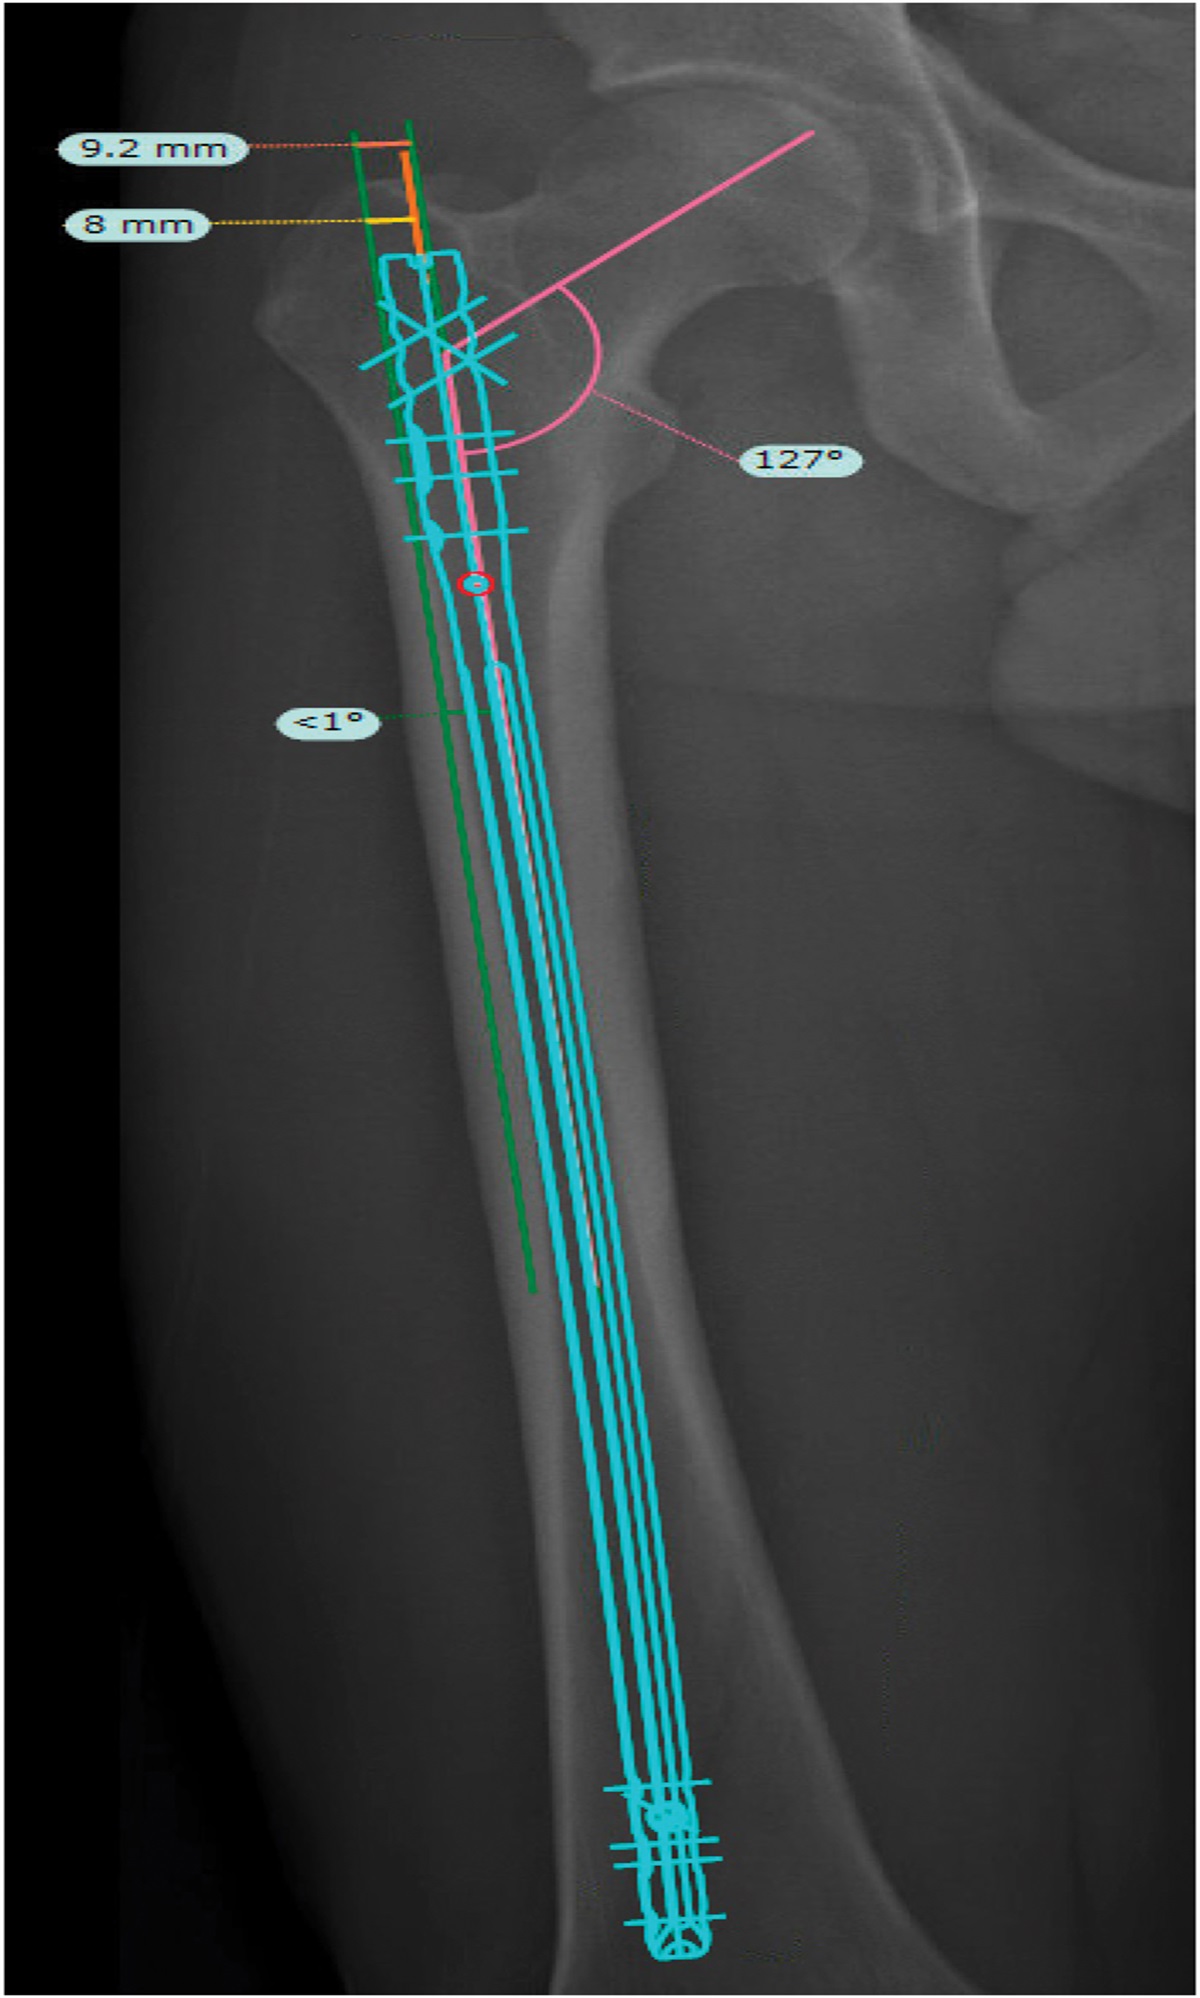 Optimizing the Entry Point for Reconstruction Nailing of the Femur